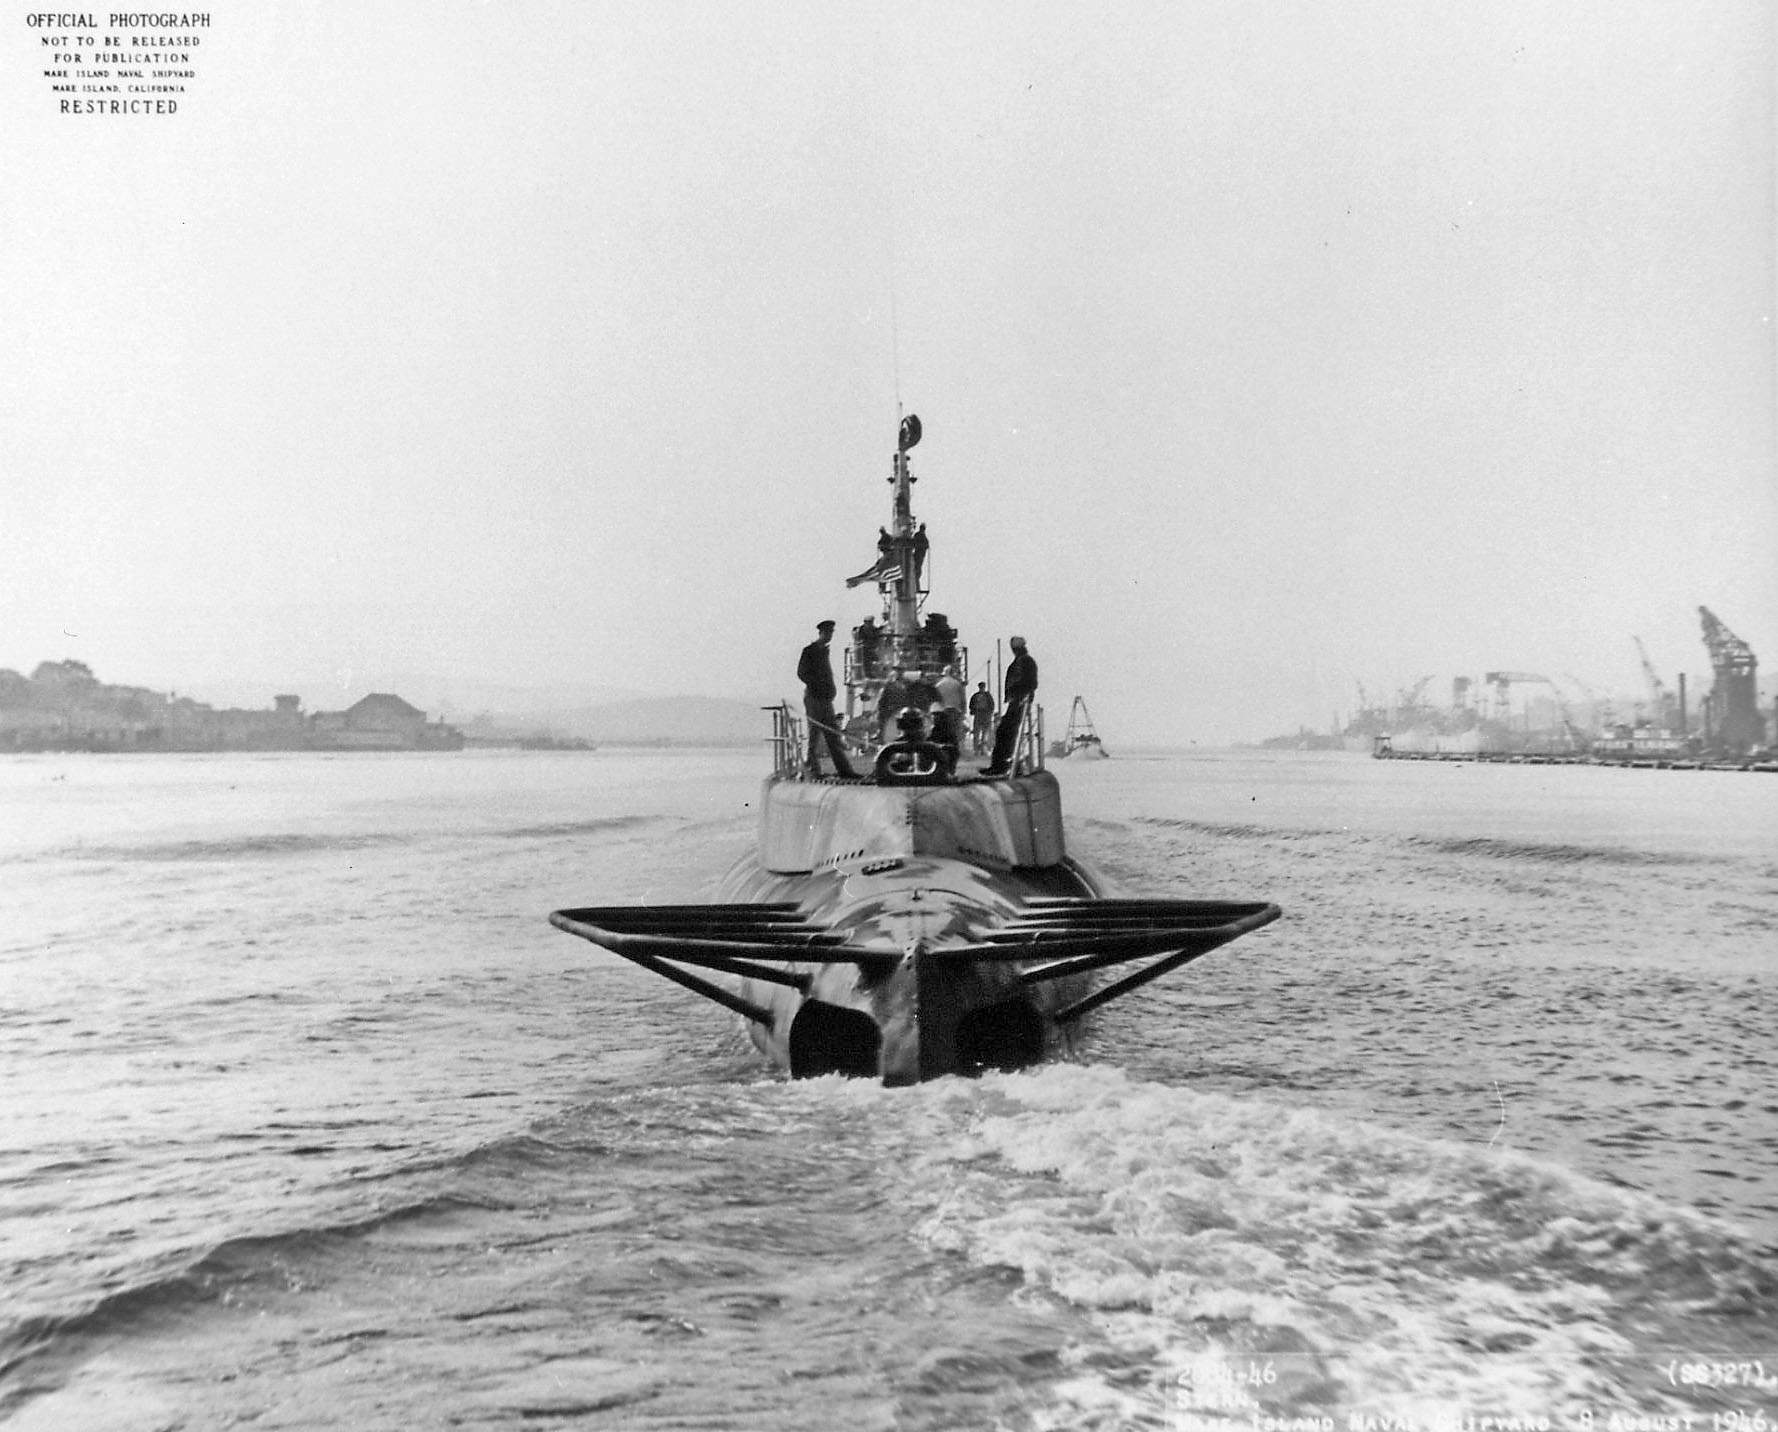 Stern view of USS Boarfish off Mare Island Navy Yard, Vallejo, California, United States, 9 Aug 1946